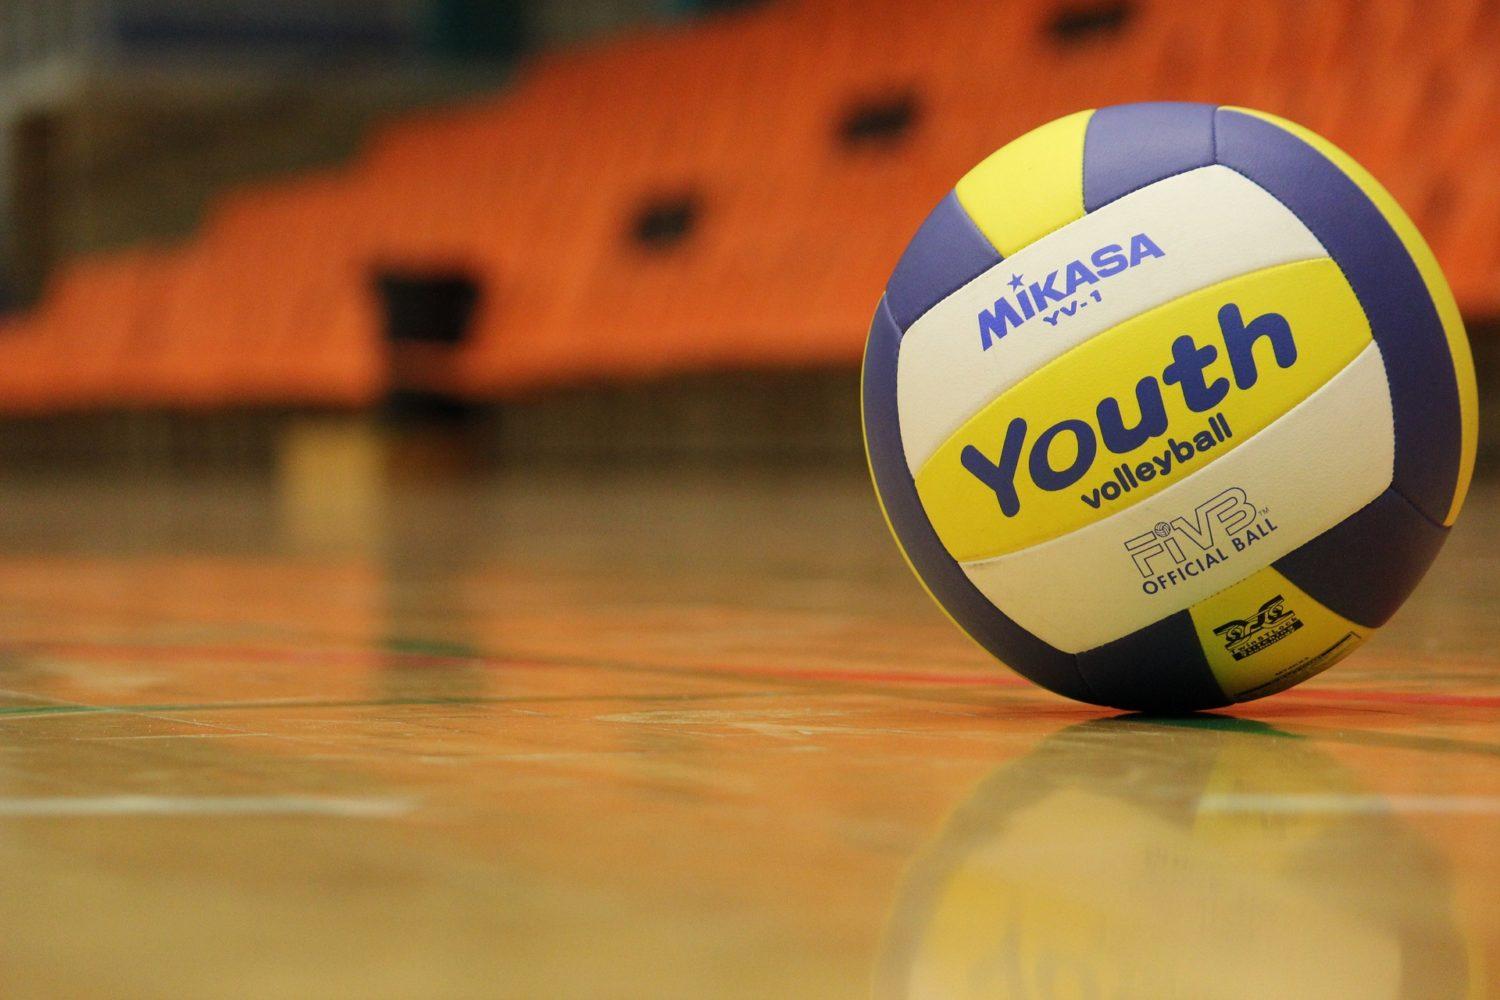 14-player squad to represent Nigeria in volleyball championship